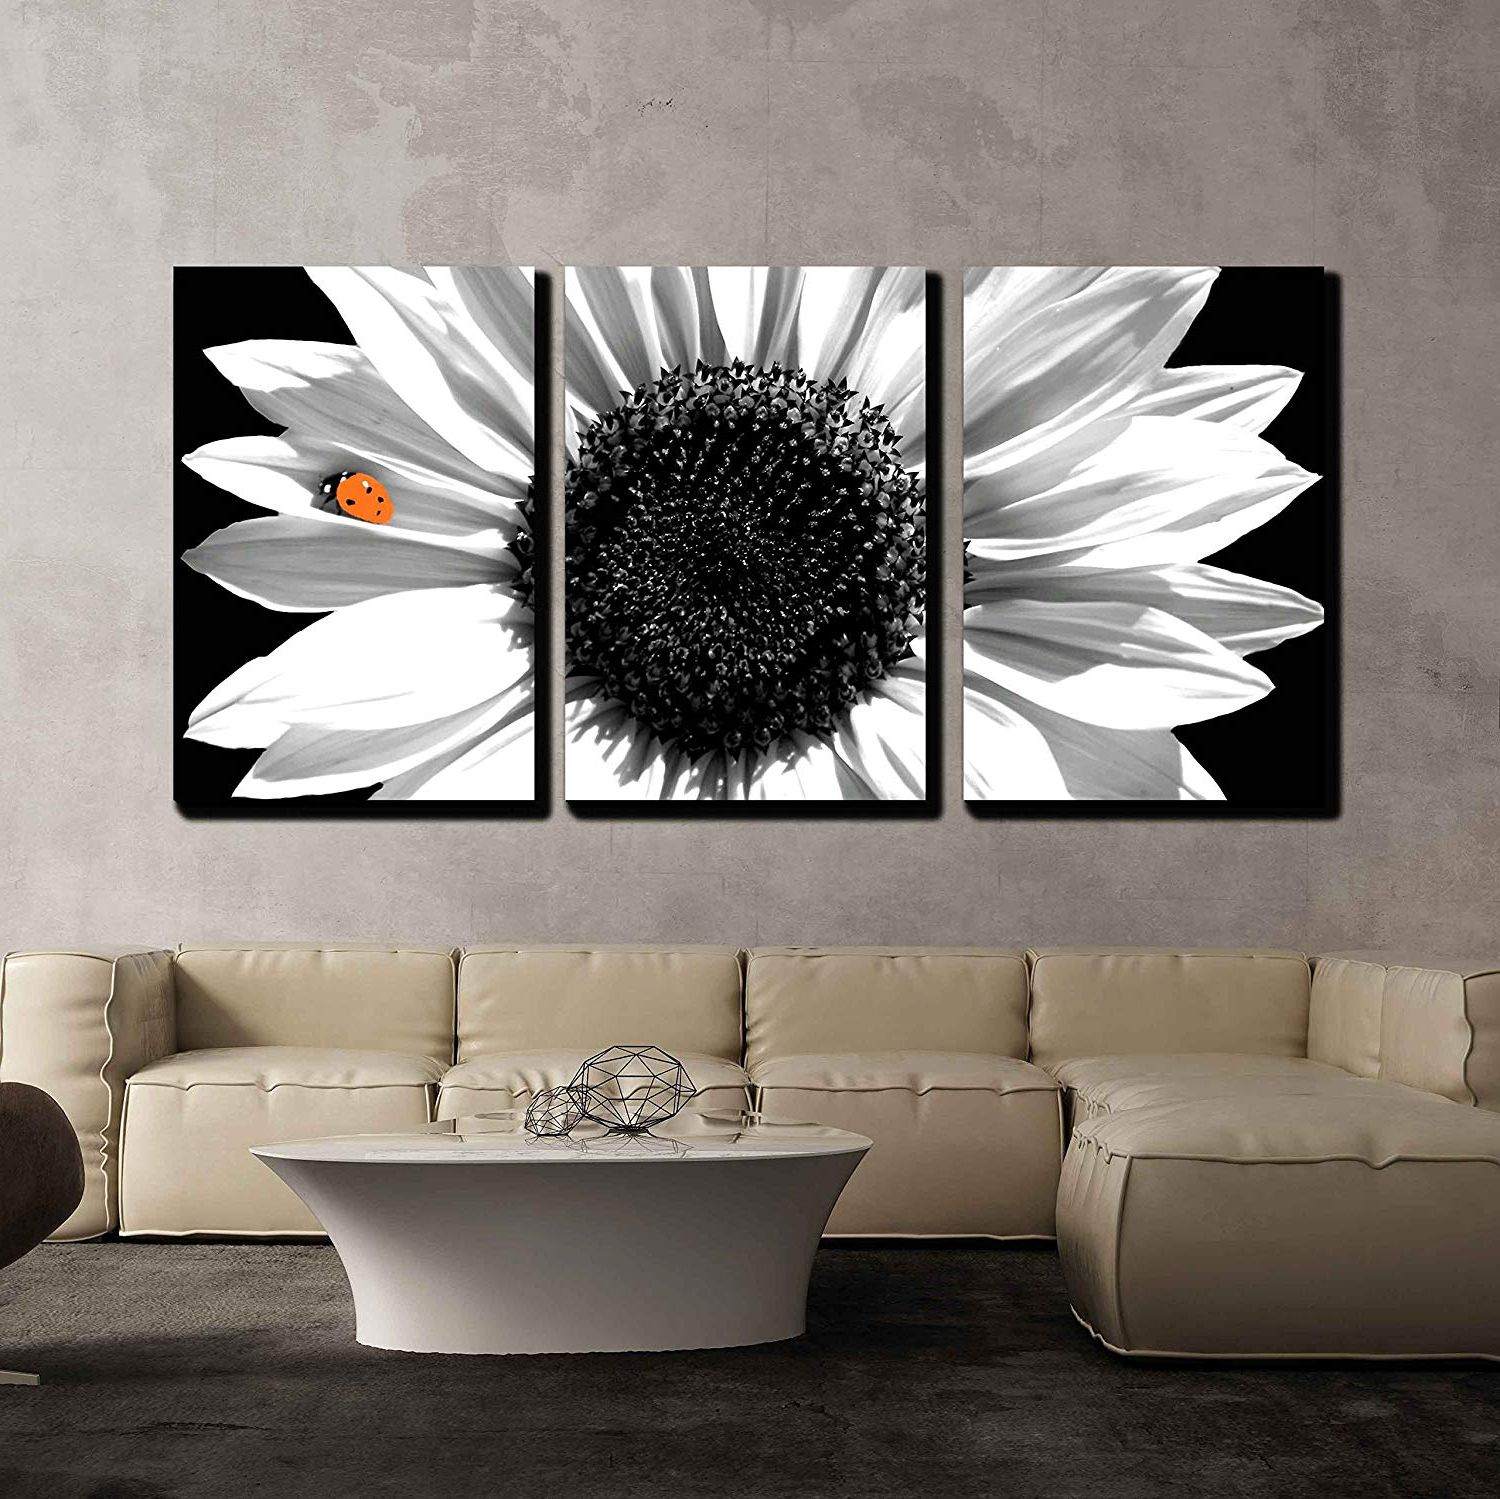 Sunflower Metal Framed Wall Art Pertaining To Well Liked Wall26 – 3 Piece Canvas Wall Art – Sunflower In Black And White With (View 15 of 15)